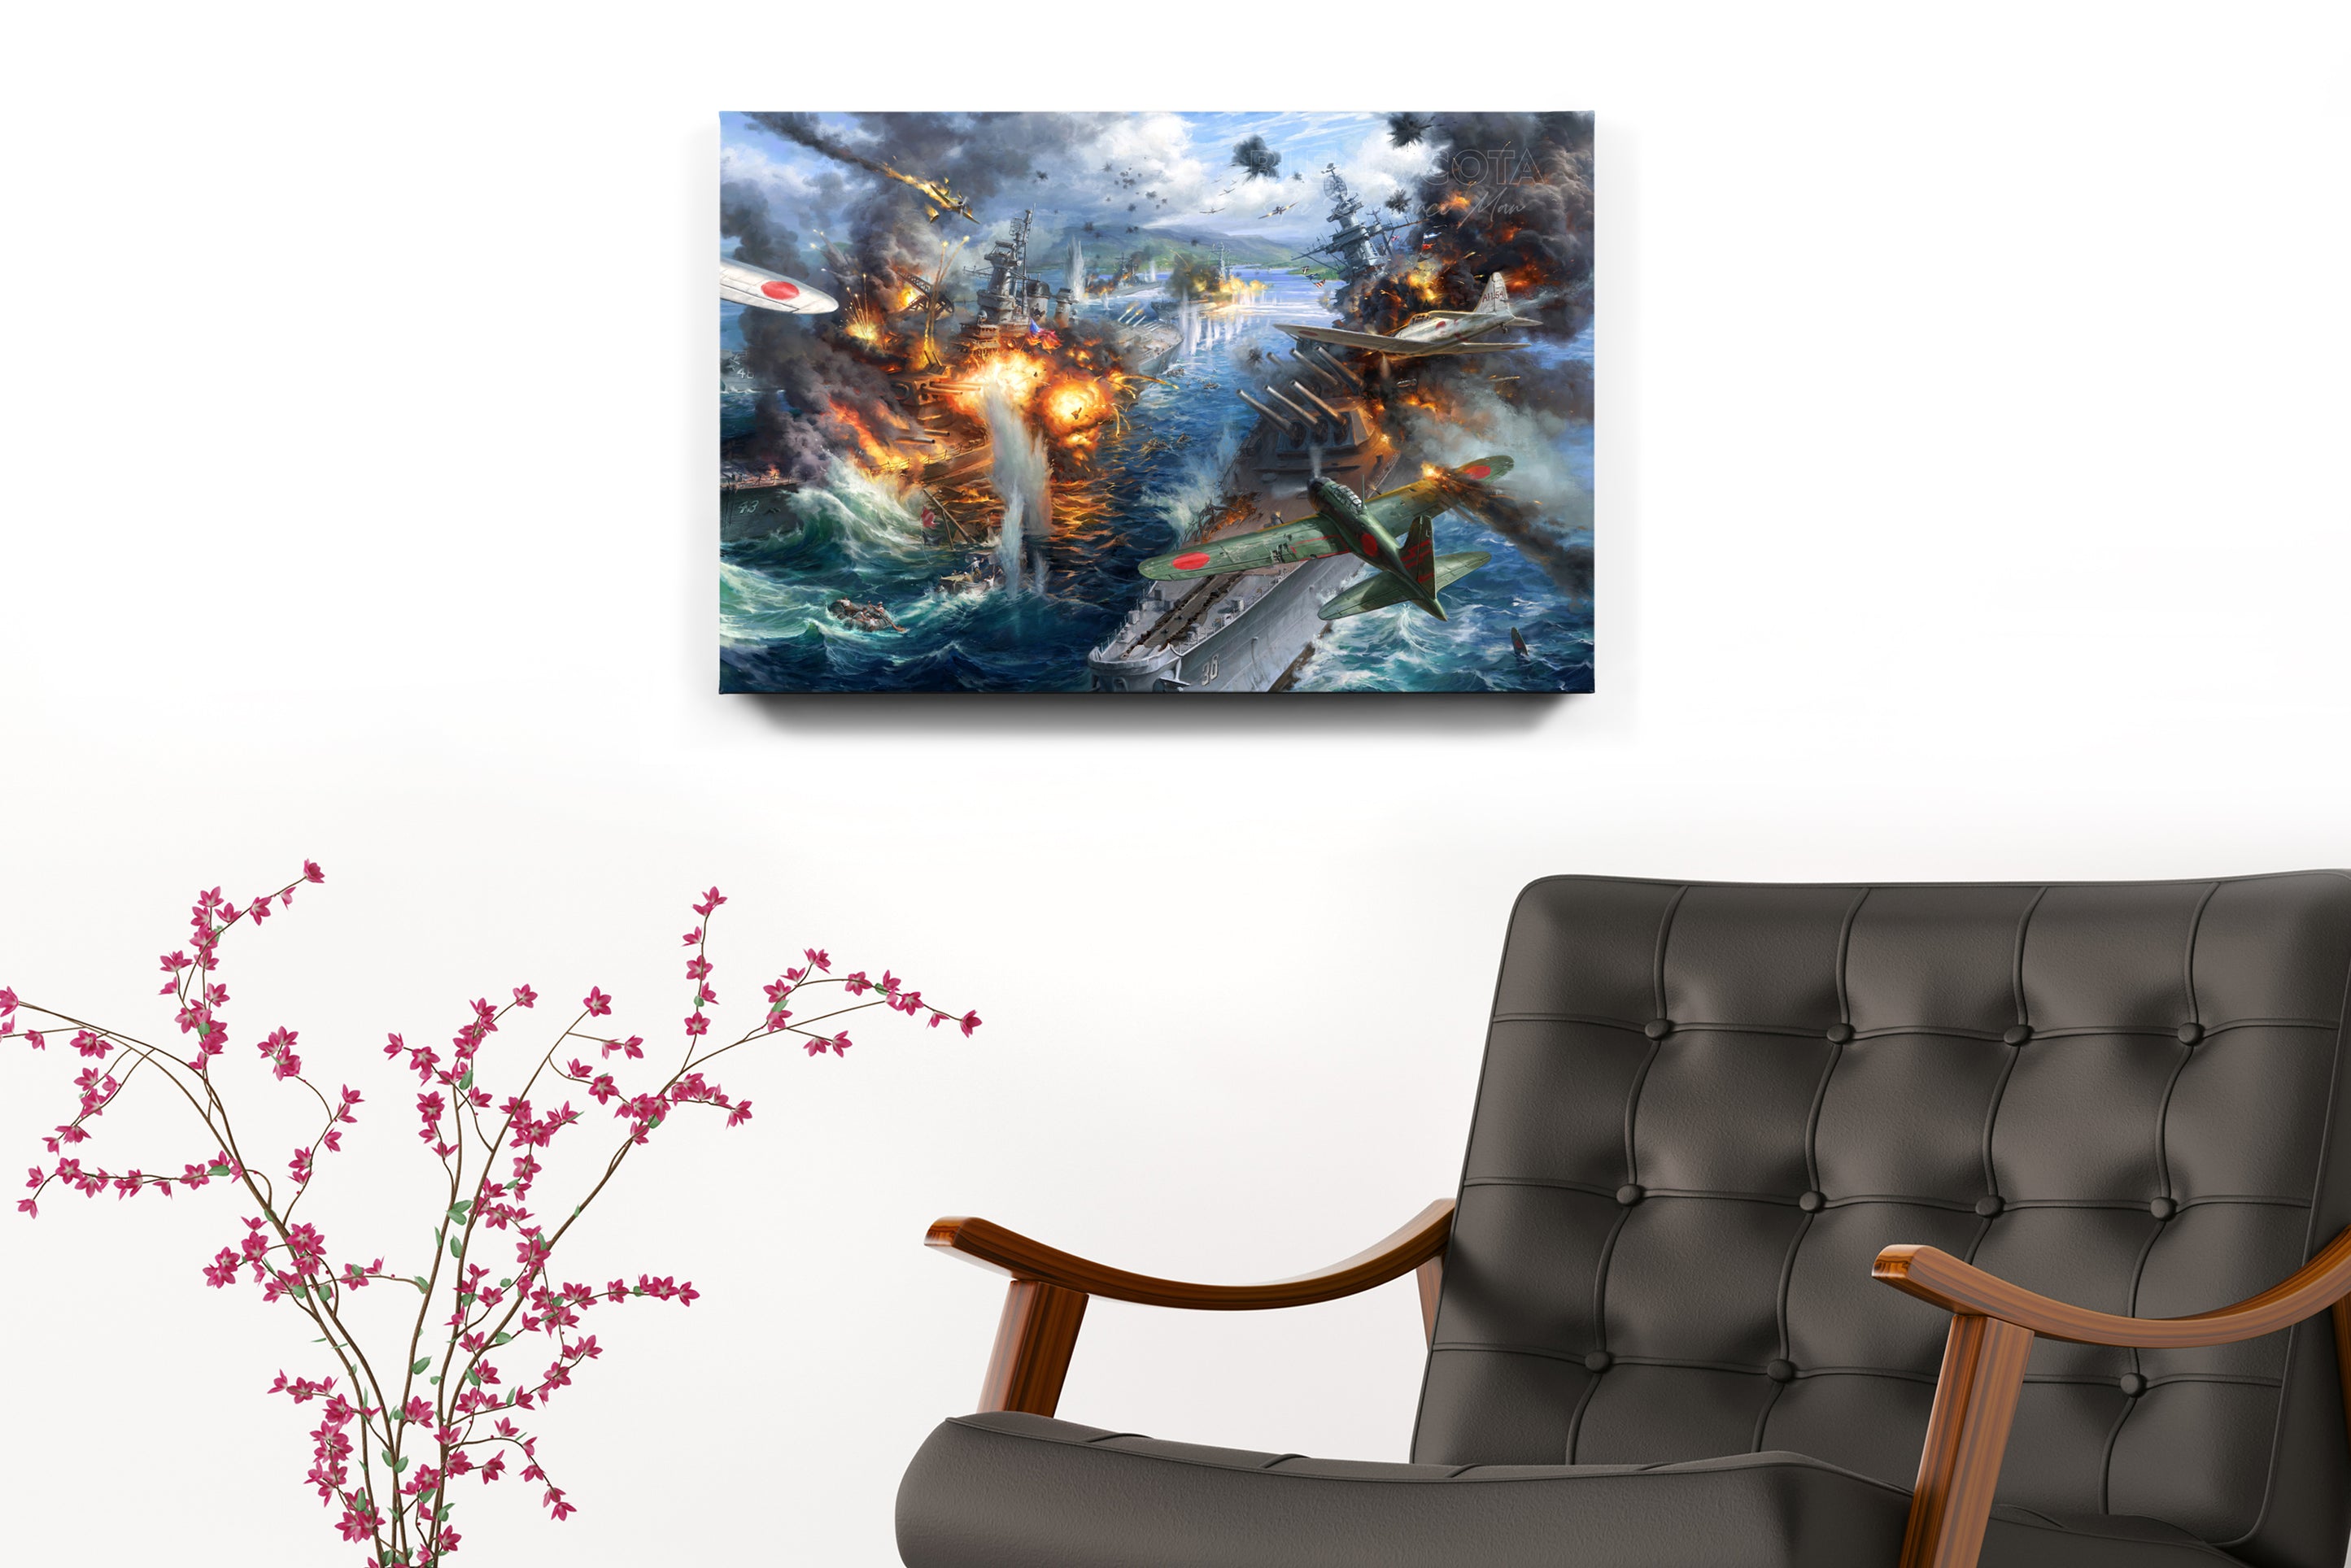 Room setting with armchair for Wall art print of the attack on Pearl Harbor, Japanese planes bombing American vessels and battleships, on a background of destruction, smoke and fire, realism style with detailed brushstrokes.